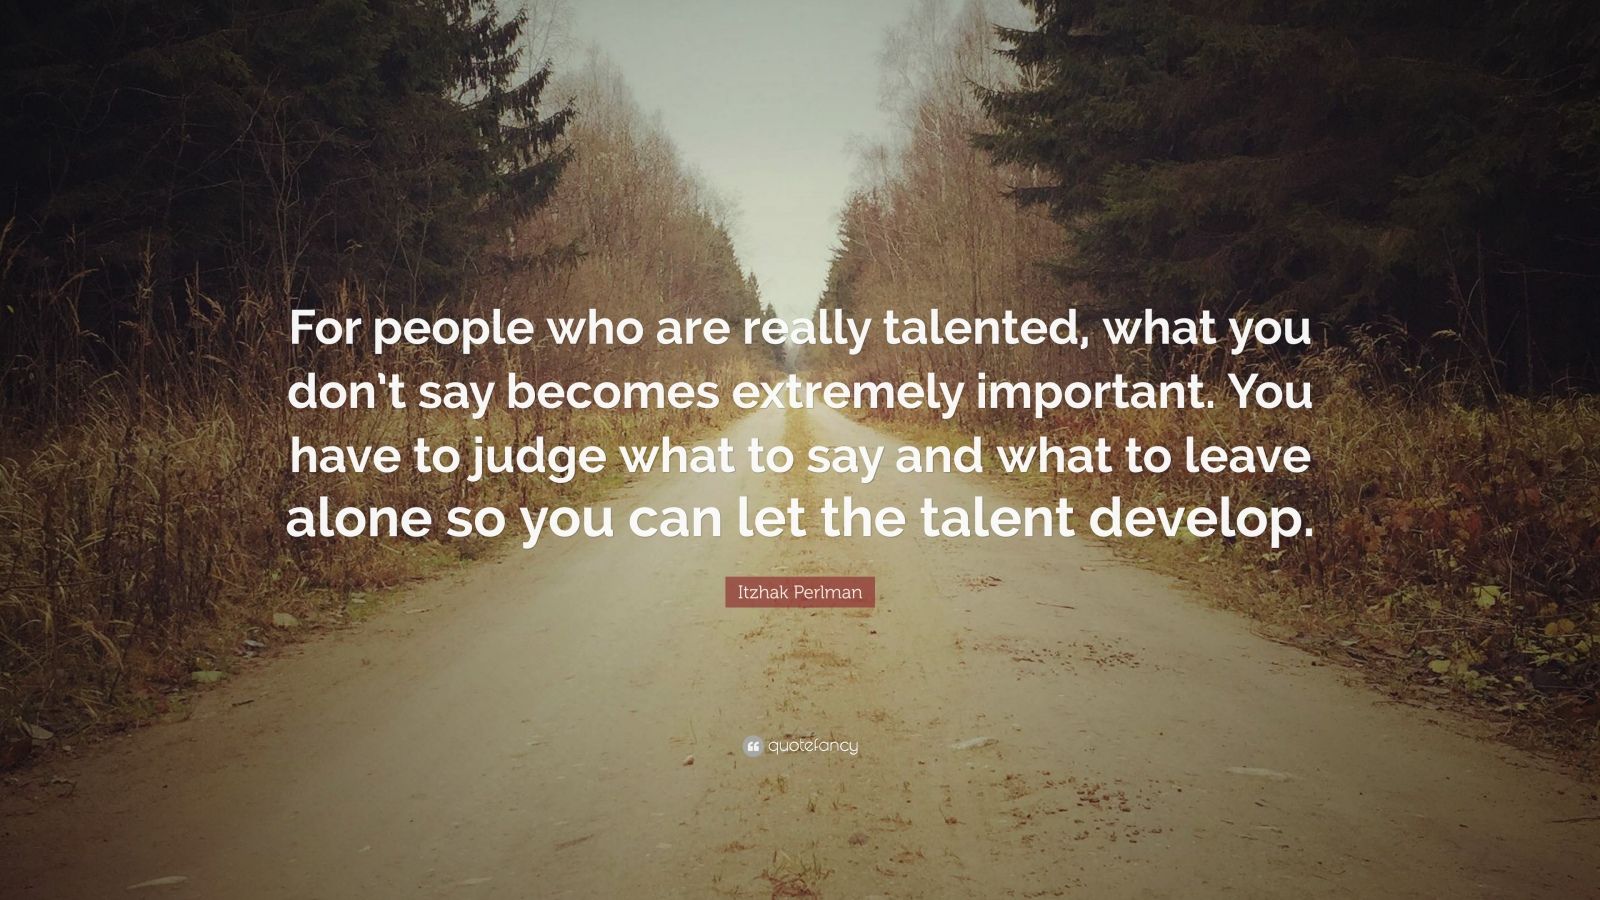 Itzhak Perlman Quote: “For people who are really talented, what you don ...